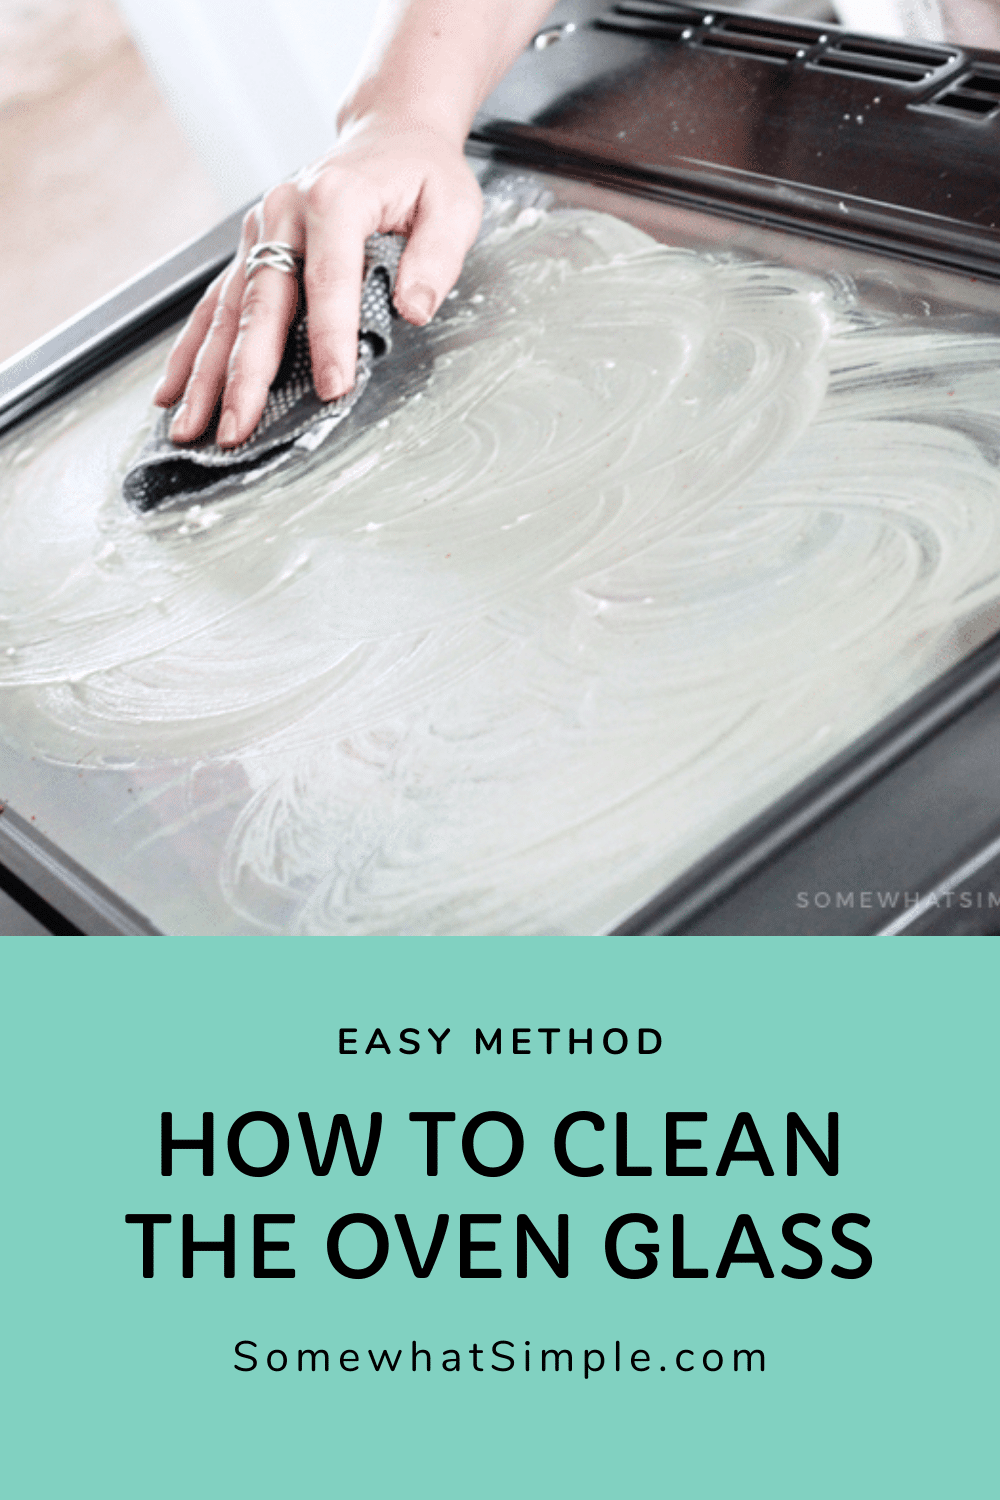 Cleaning the oven is no fun, but it's even less fun when your cleaning method is ineffective. Follow our step-by-step guide to clean your oven glass quickly and thoroughly, with no expensive products required. via @somewhatsimple